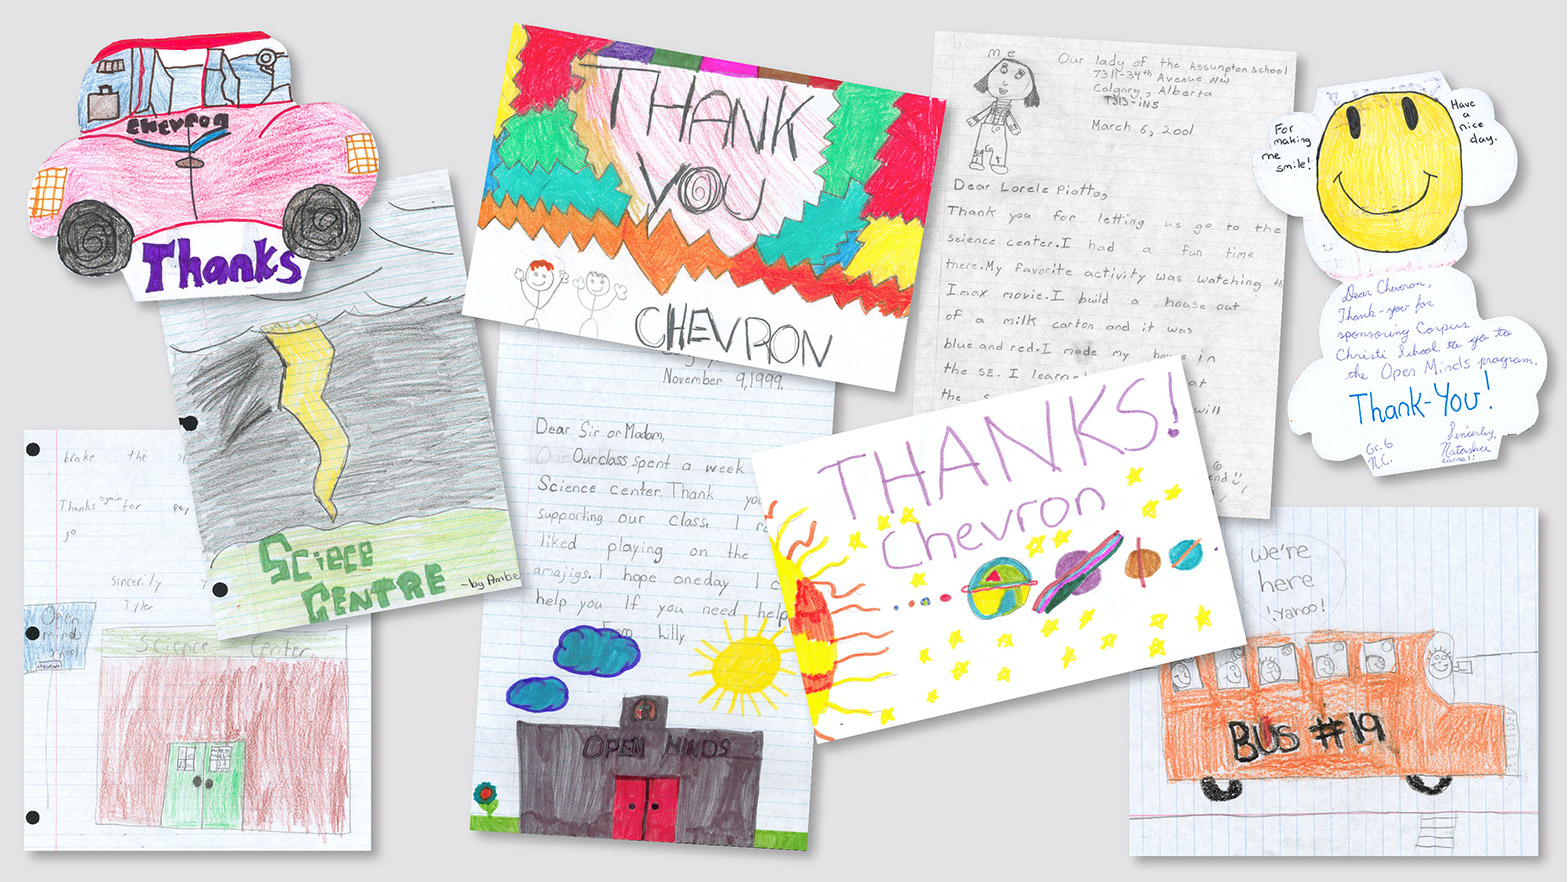 Open Minds program thank you cards